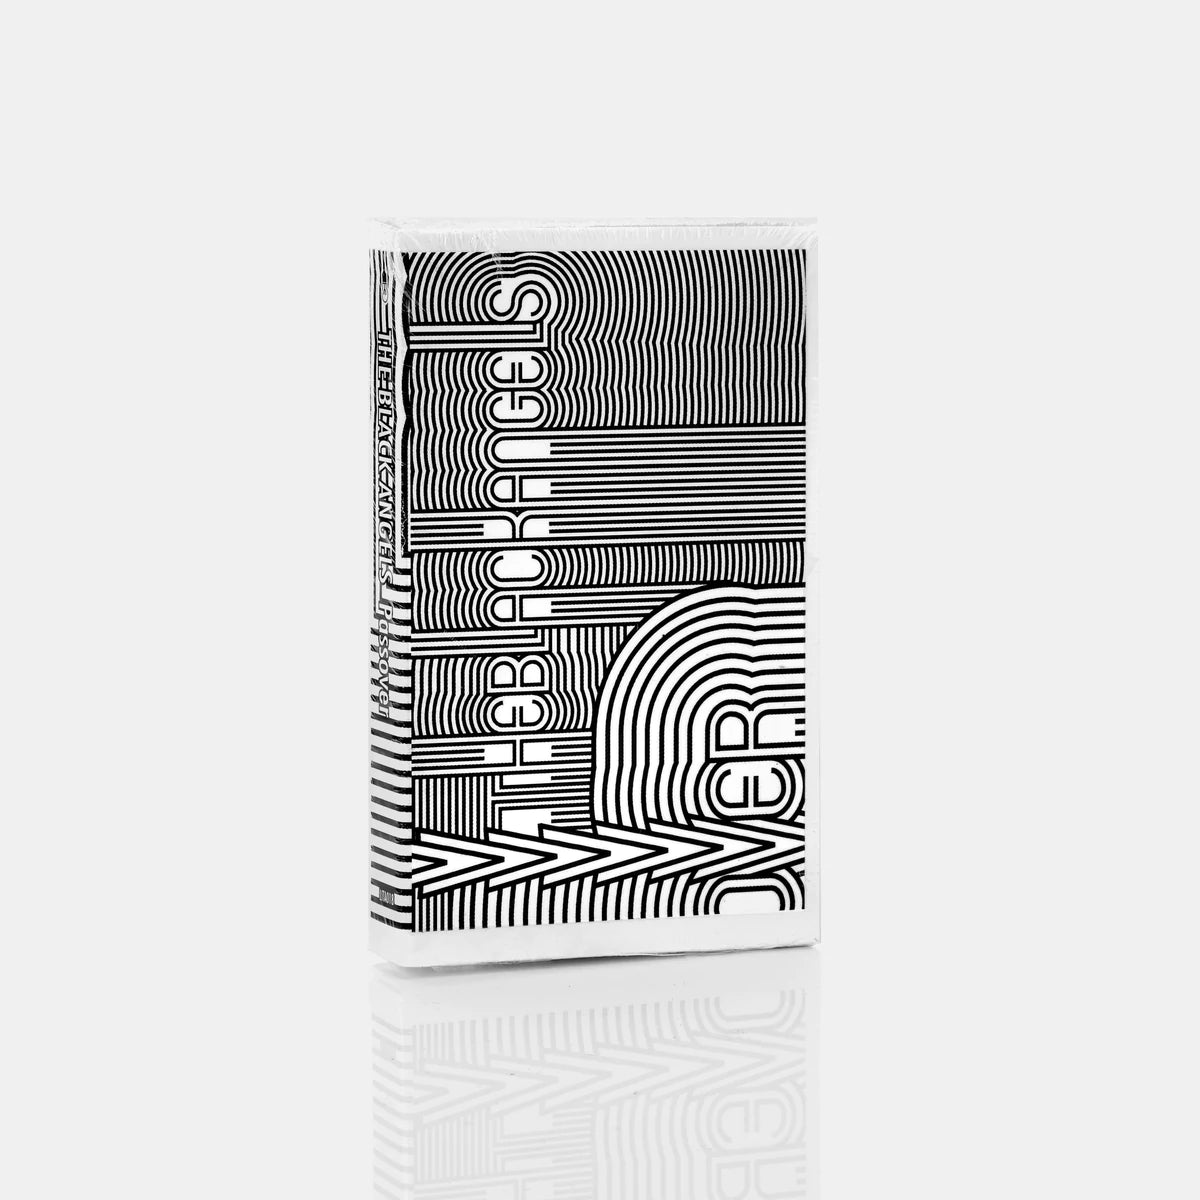 The Black Angels – Passover Cassette (Limited To 1500 Copies)